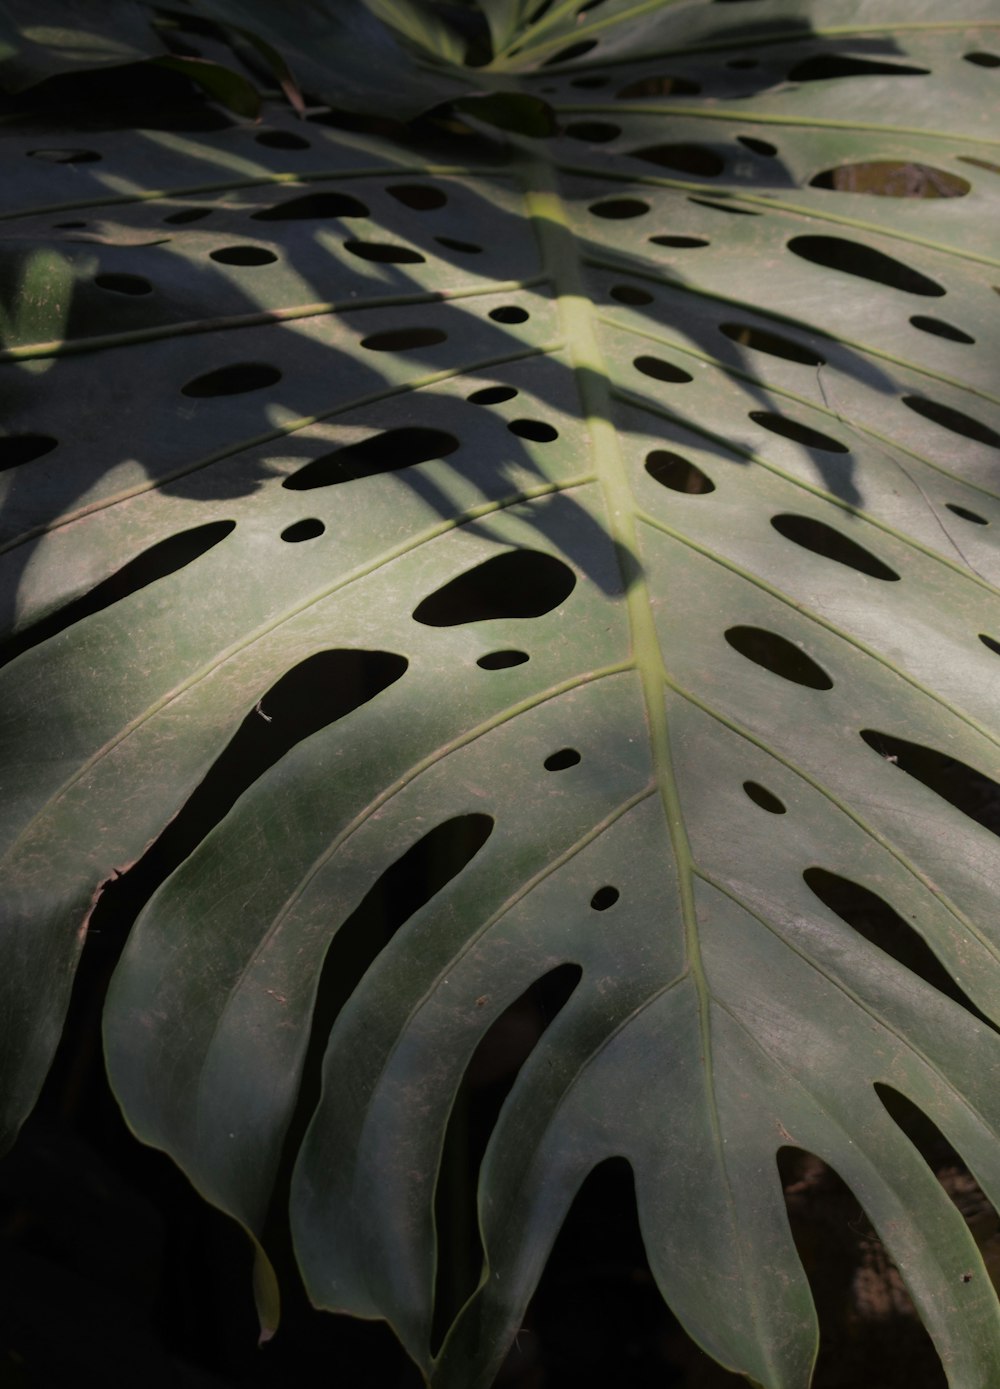 a large green leaf with holes in it